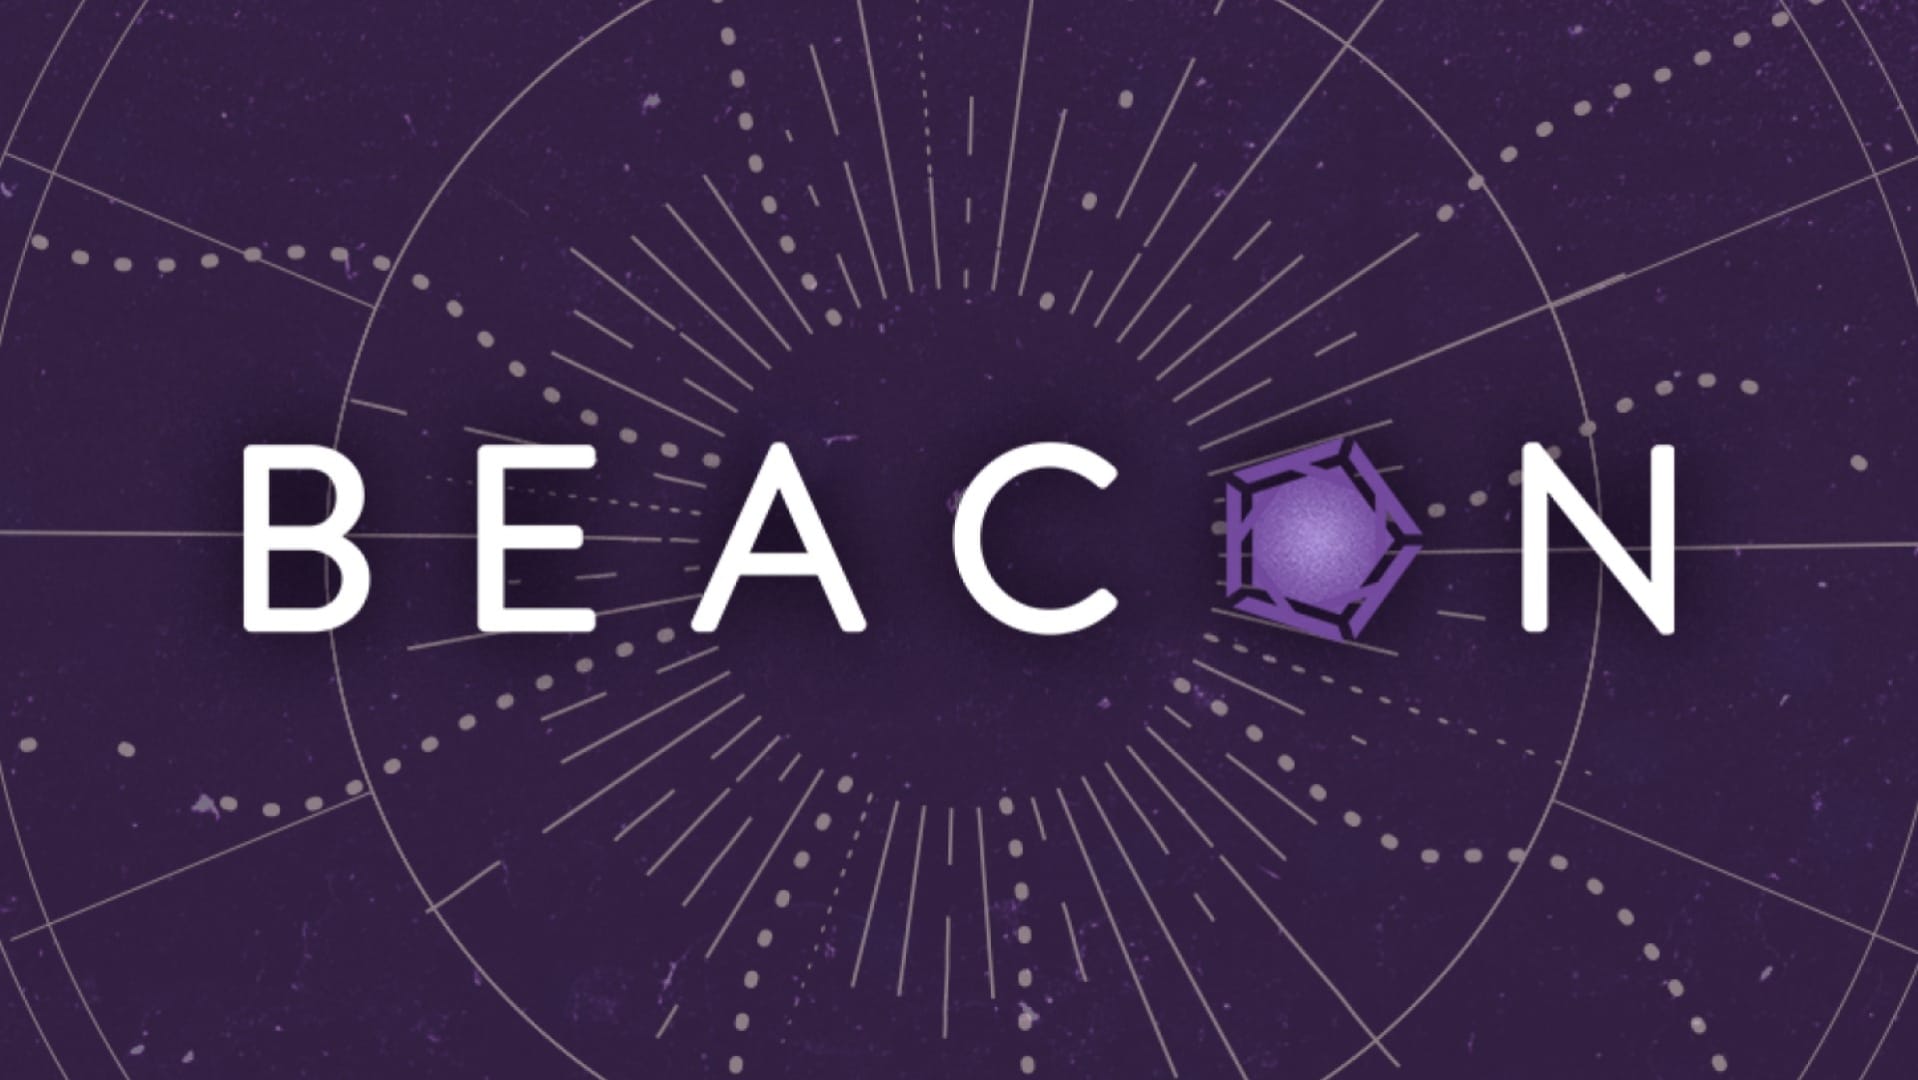 The logo for the Critical Role Beacon service on a purple background sprinkled with white circulations and patterns.